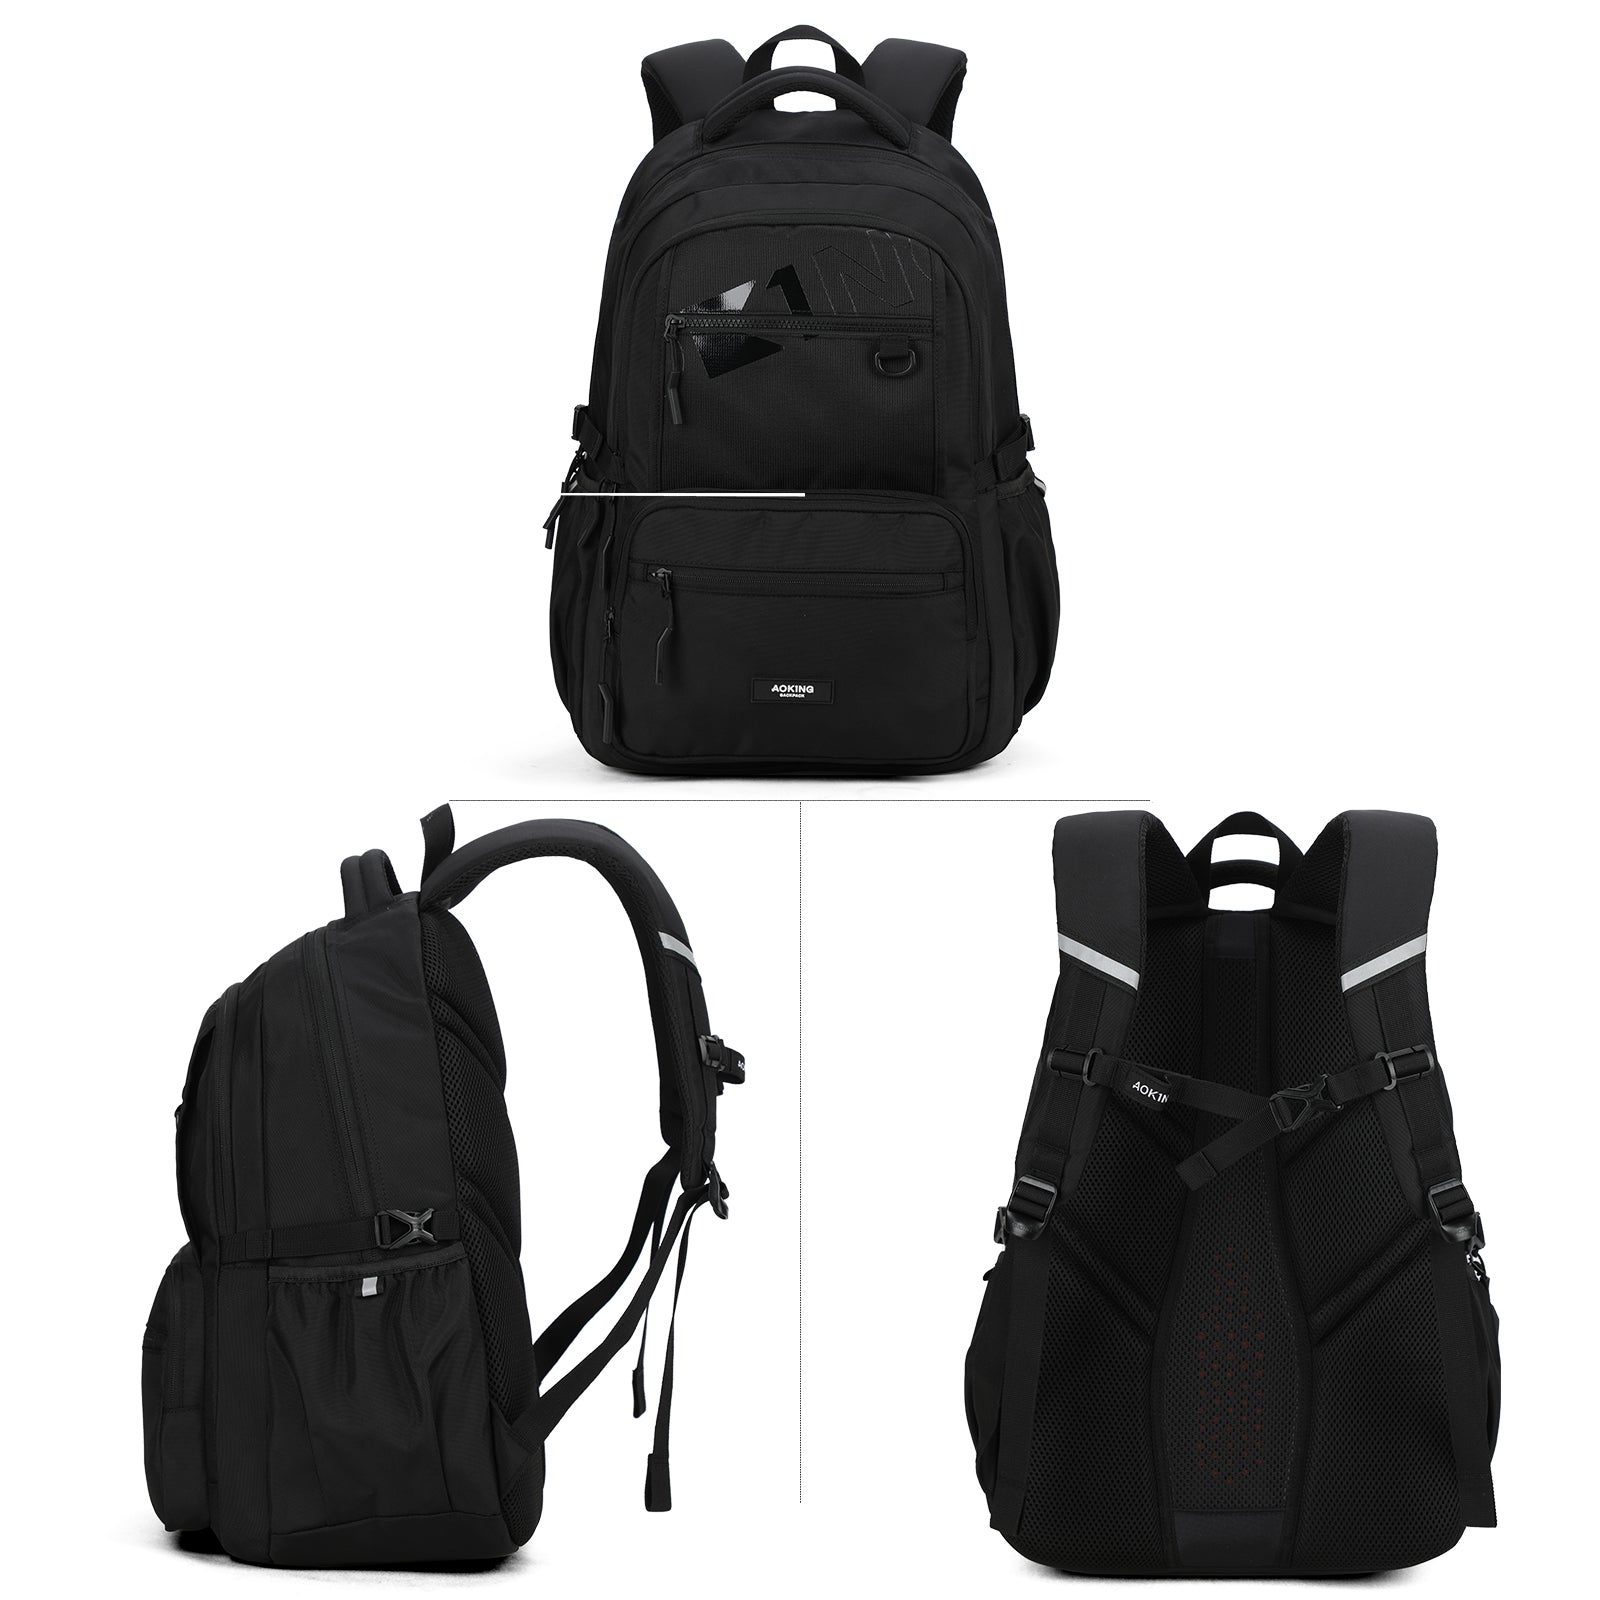 Aoking Backpack Large Capacity Casual Backpack Student Bag XN3340